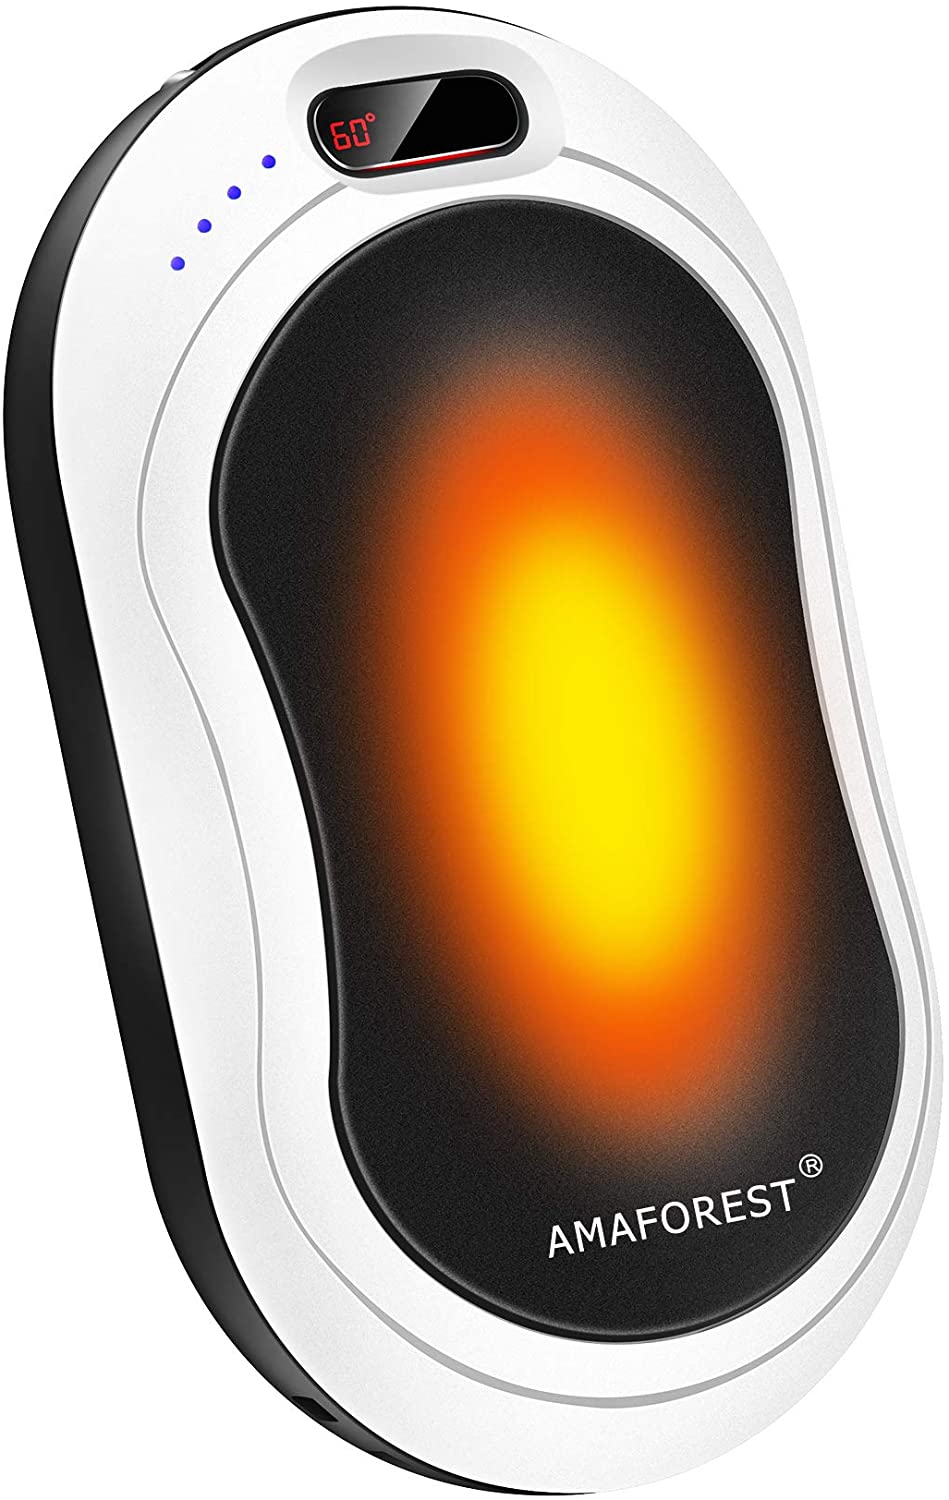 Ama Forest Hot Hands Vibrating Electric Hand Warmer